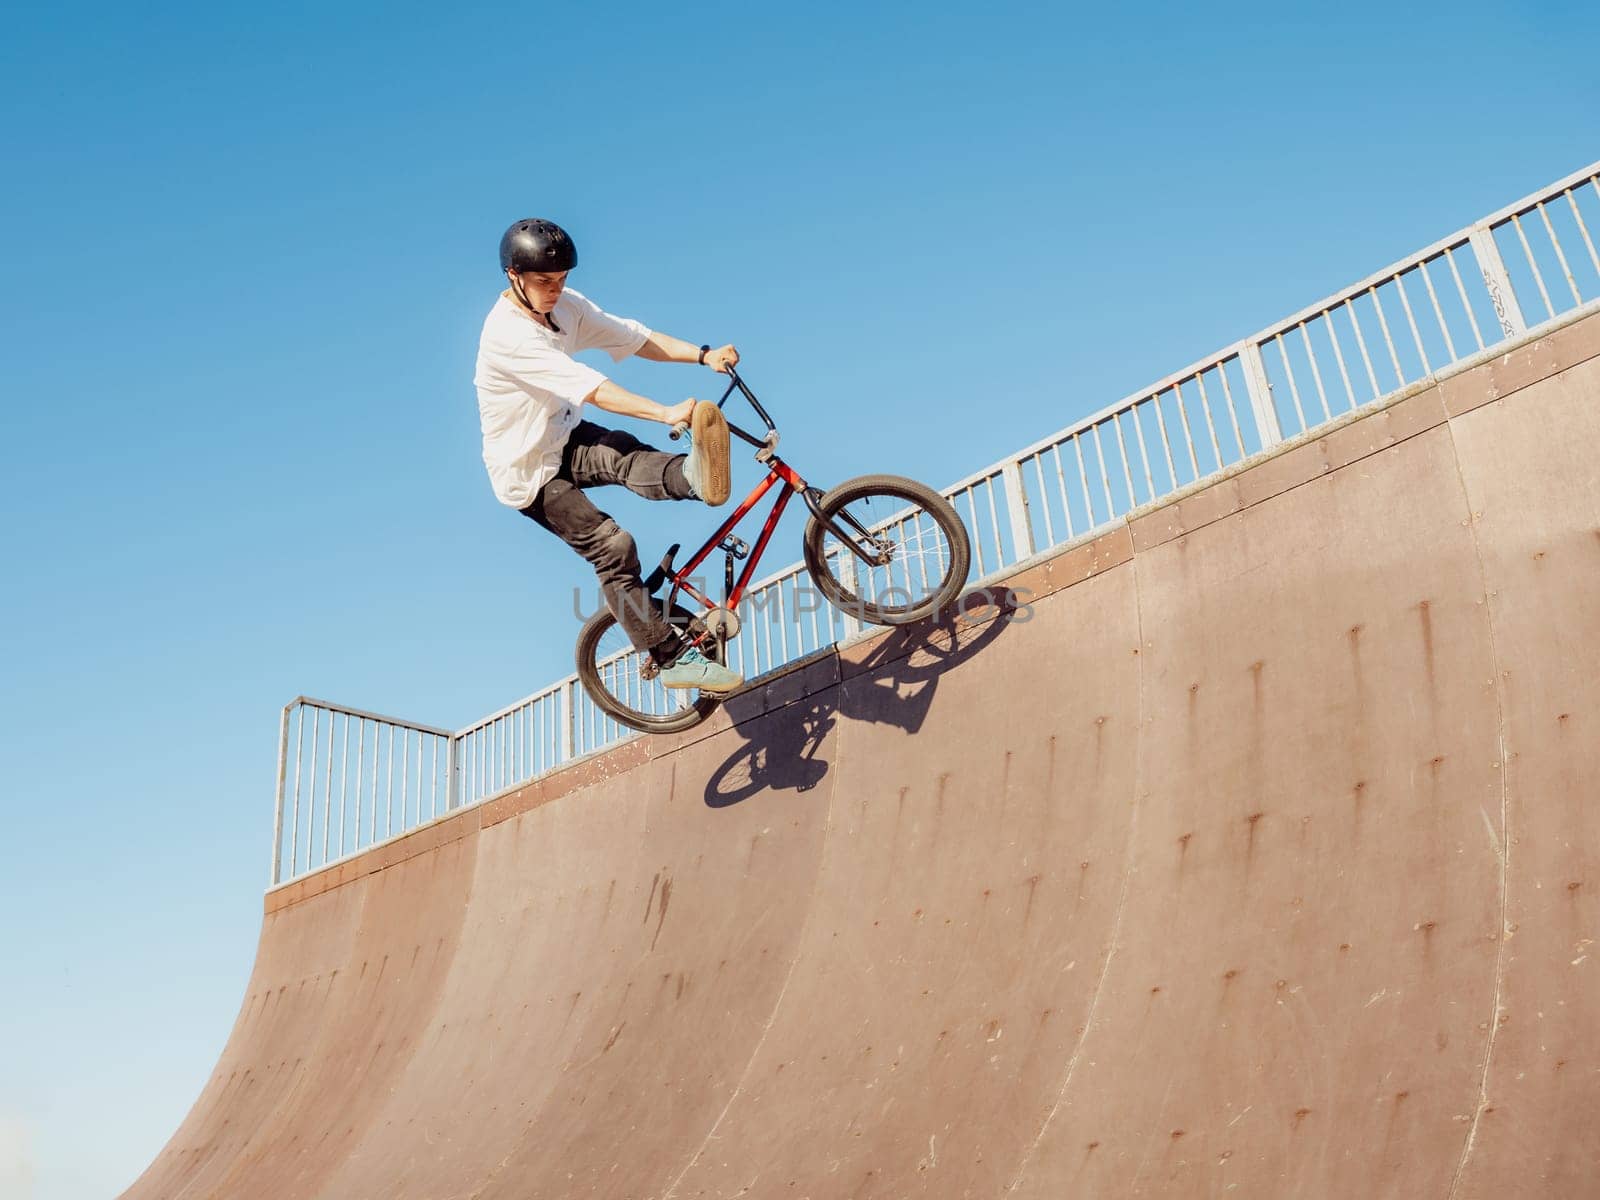 BMX bicycle rider flying and doing stunt Can-Can in wooden quarter pipe. Skilled BMX freestyler athlete jumping and doing aerial trick Can-Can in street wooden half-pipe ramp park